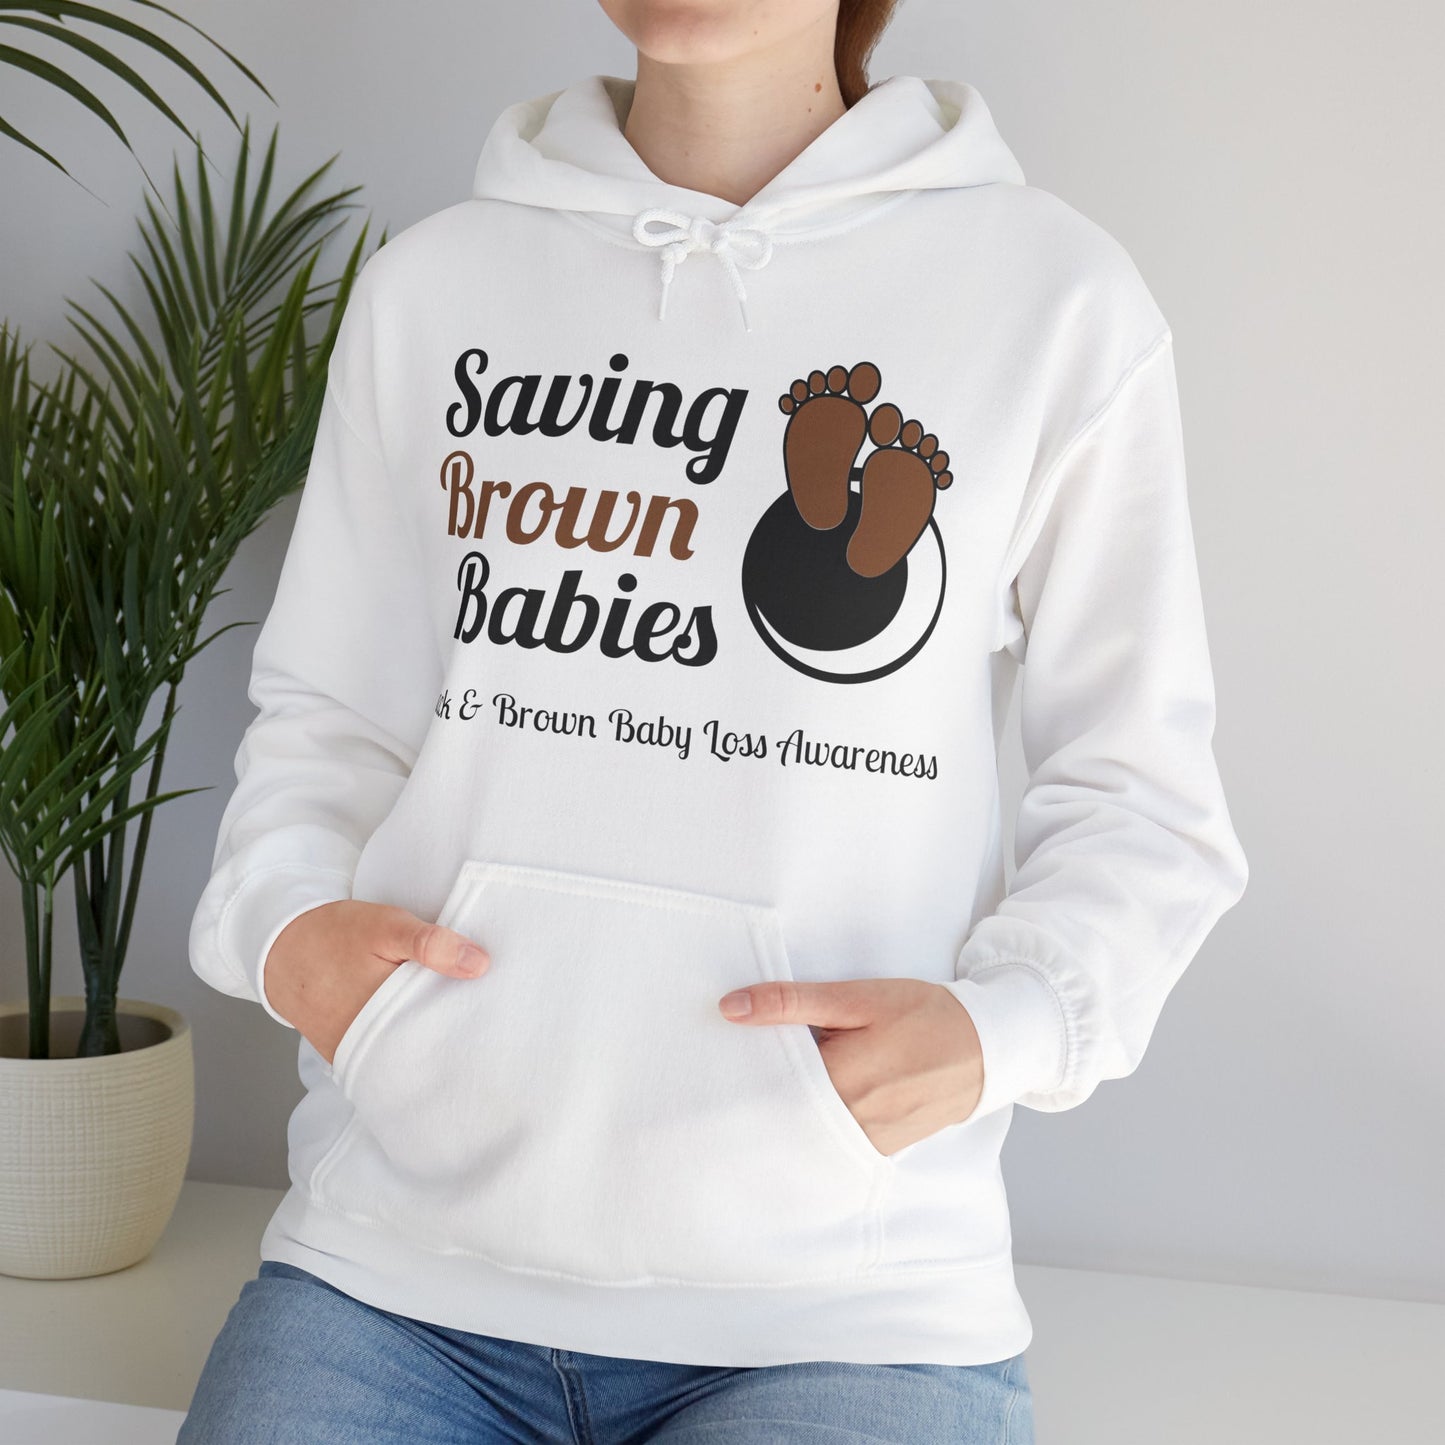 Quietly United in Loss Together Non-Profit / Saving Brown Babies Charity Hooded Sweatshirt, Pregnancy & Infant Loss Awareness